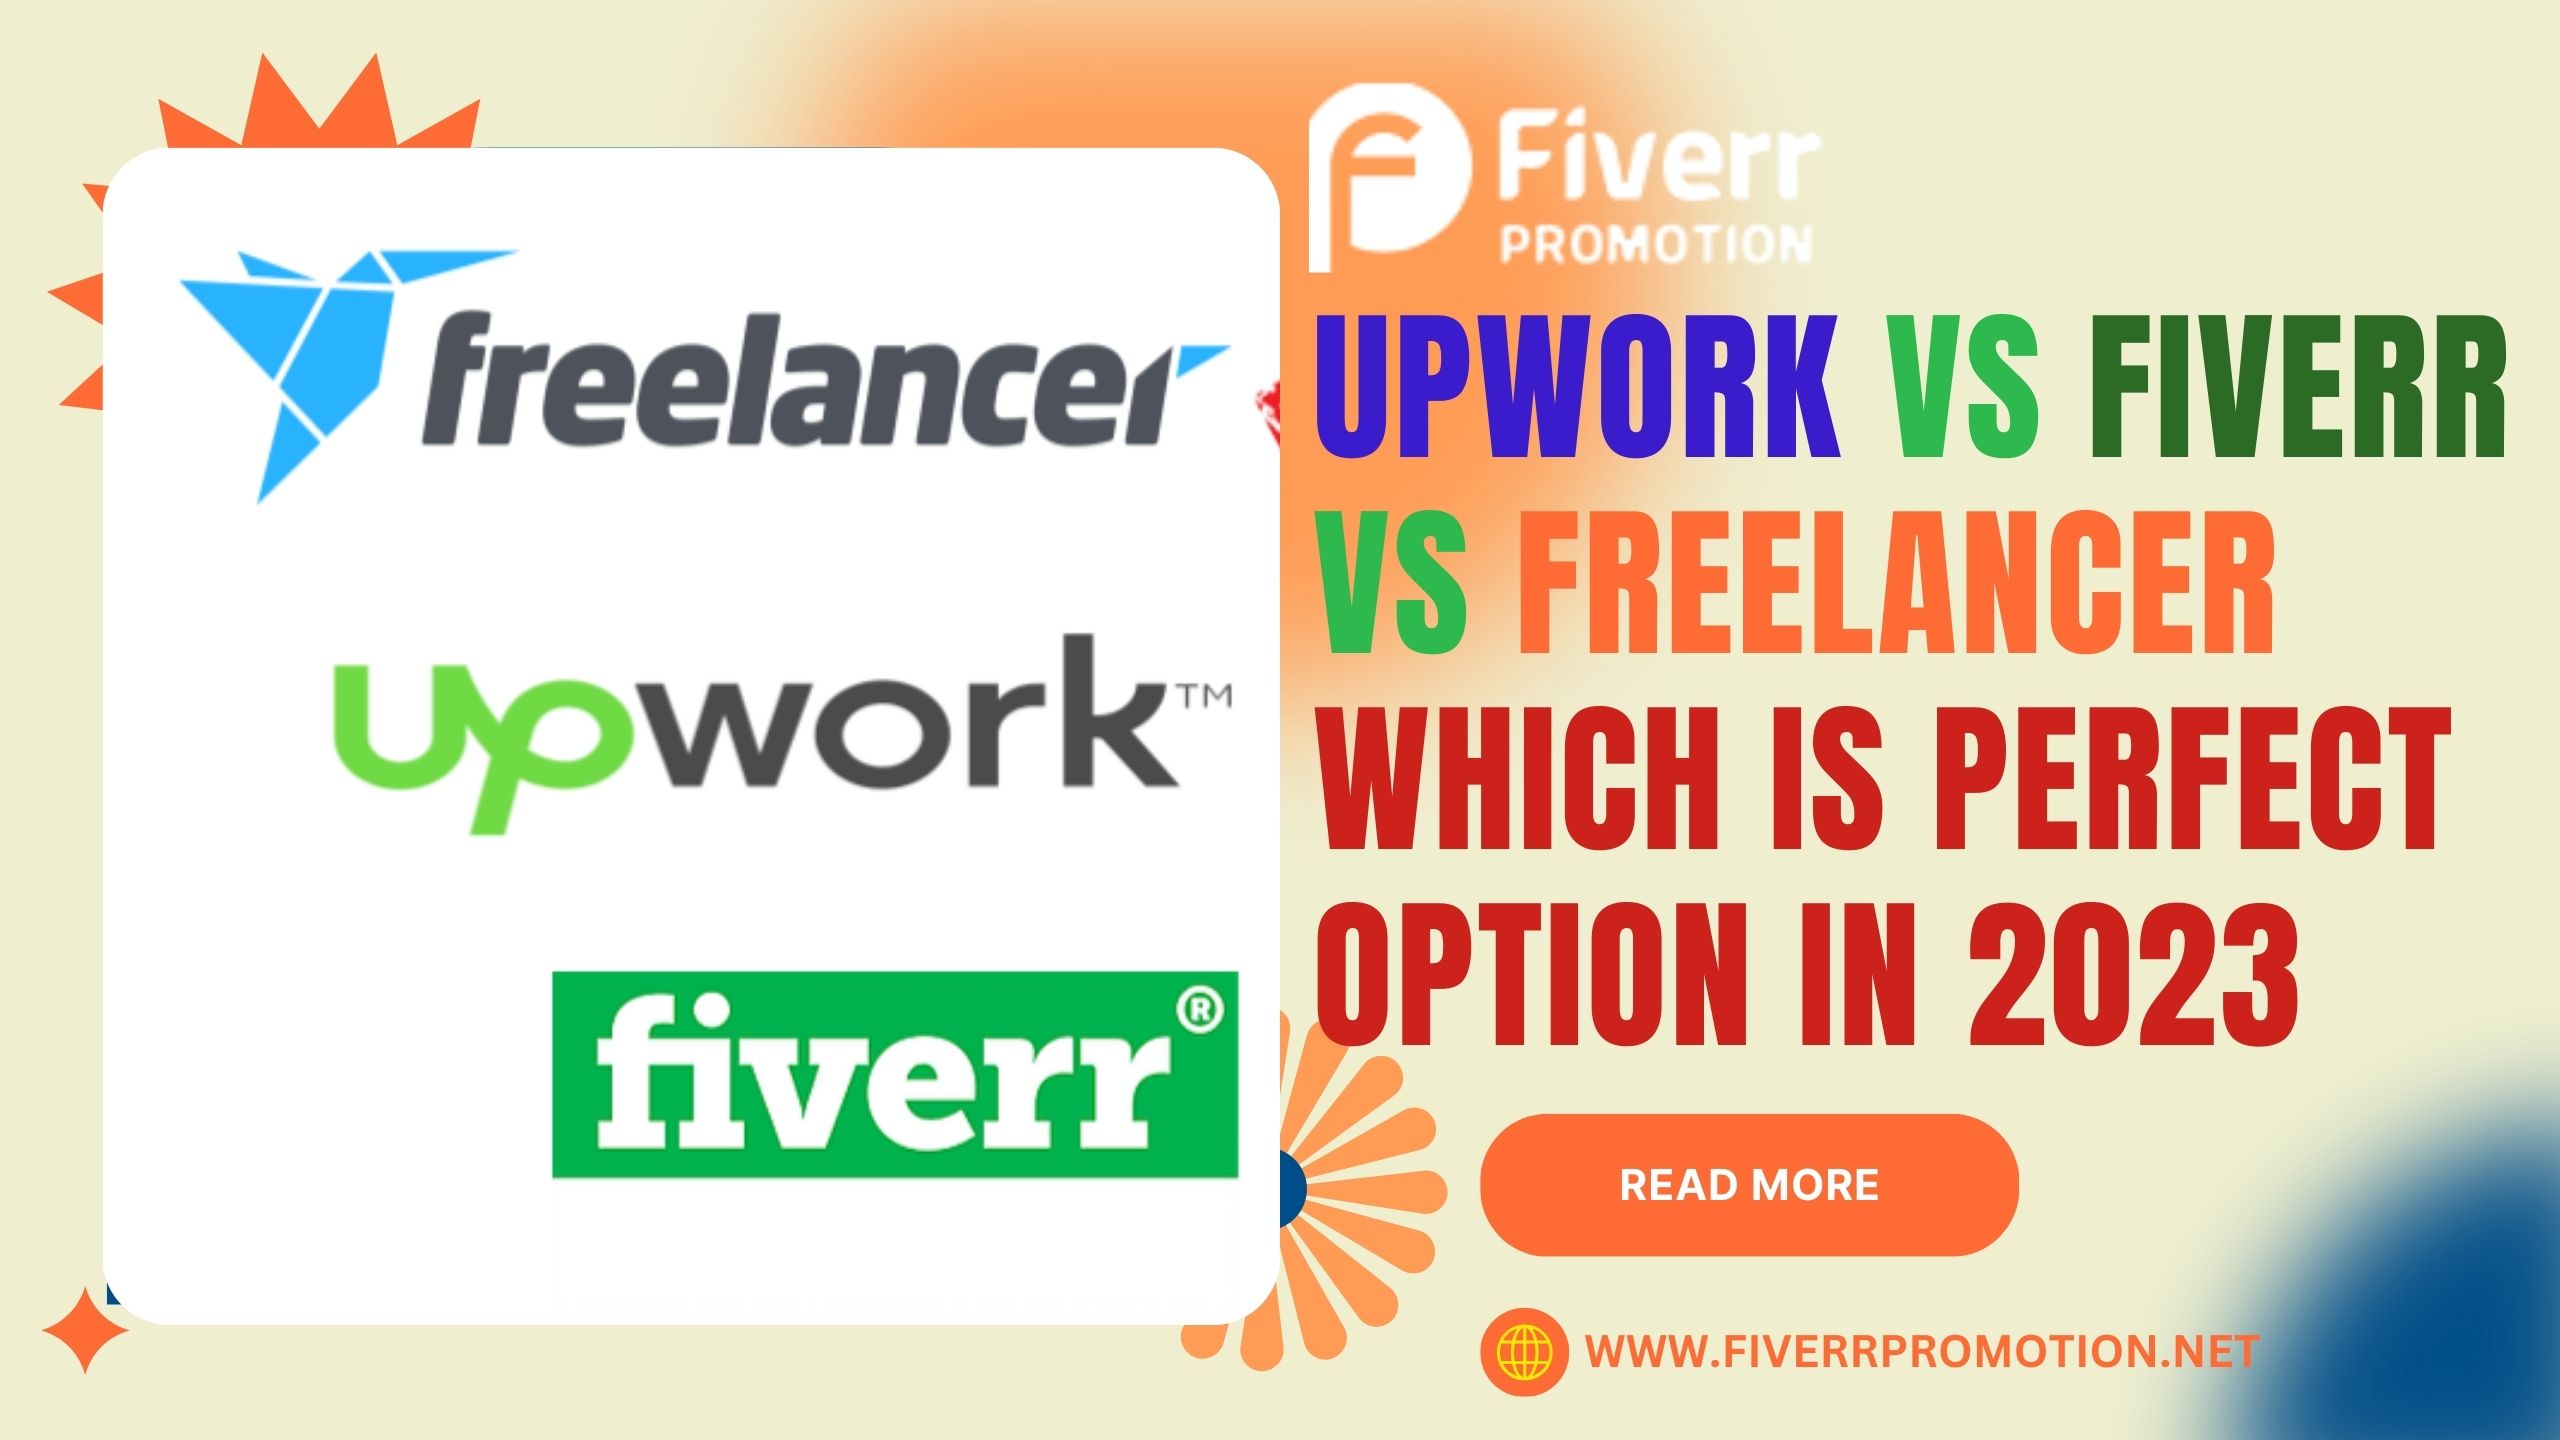 Upwork Vs Fiverr Vs Freelancer Which is Perfect Option in 2023